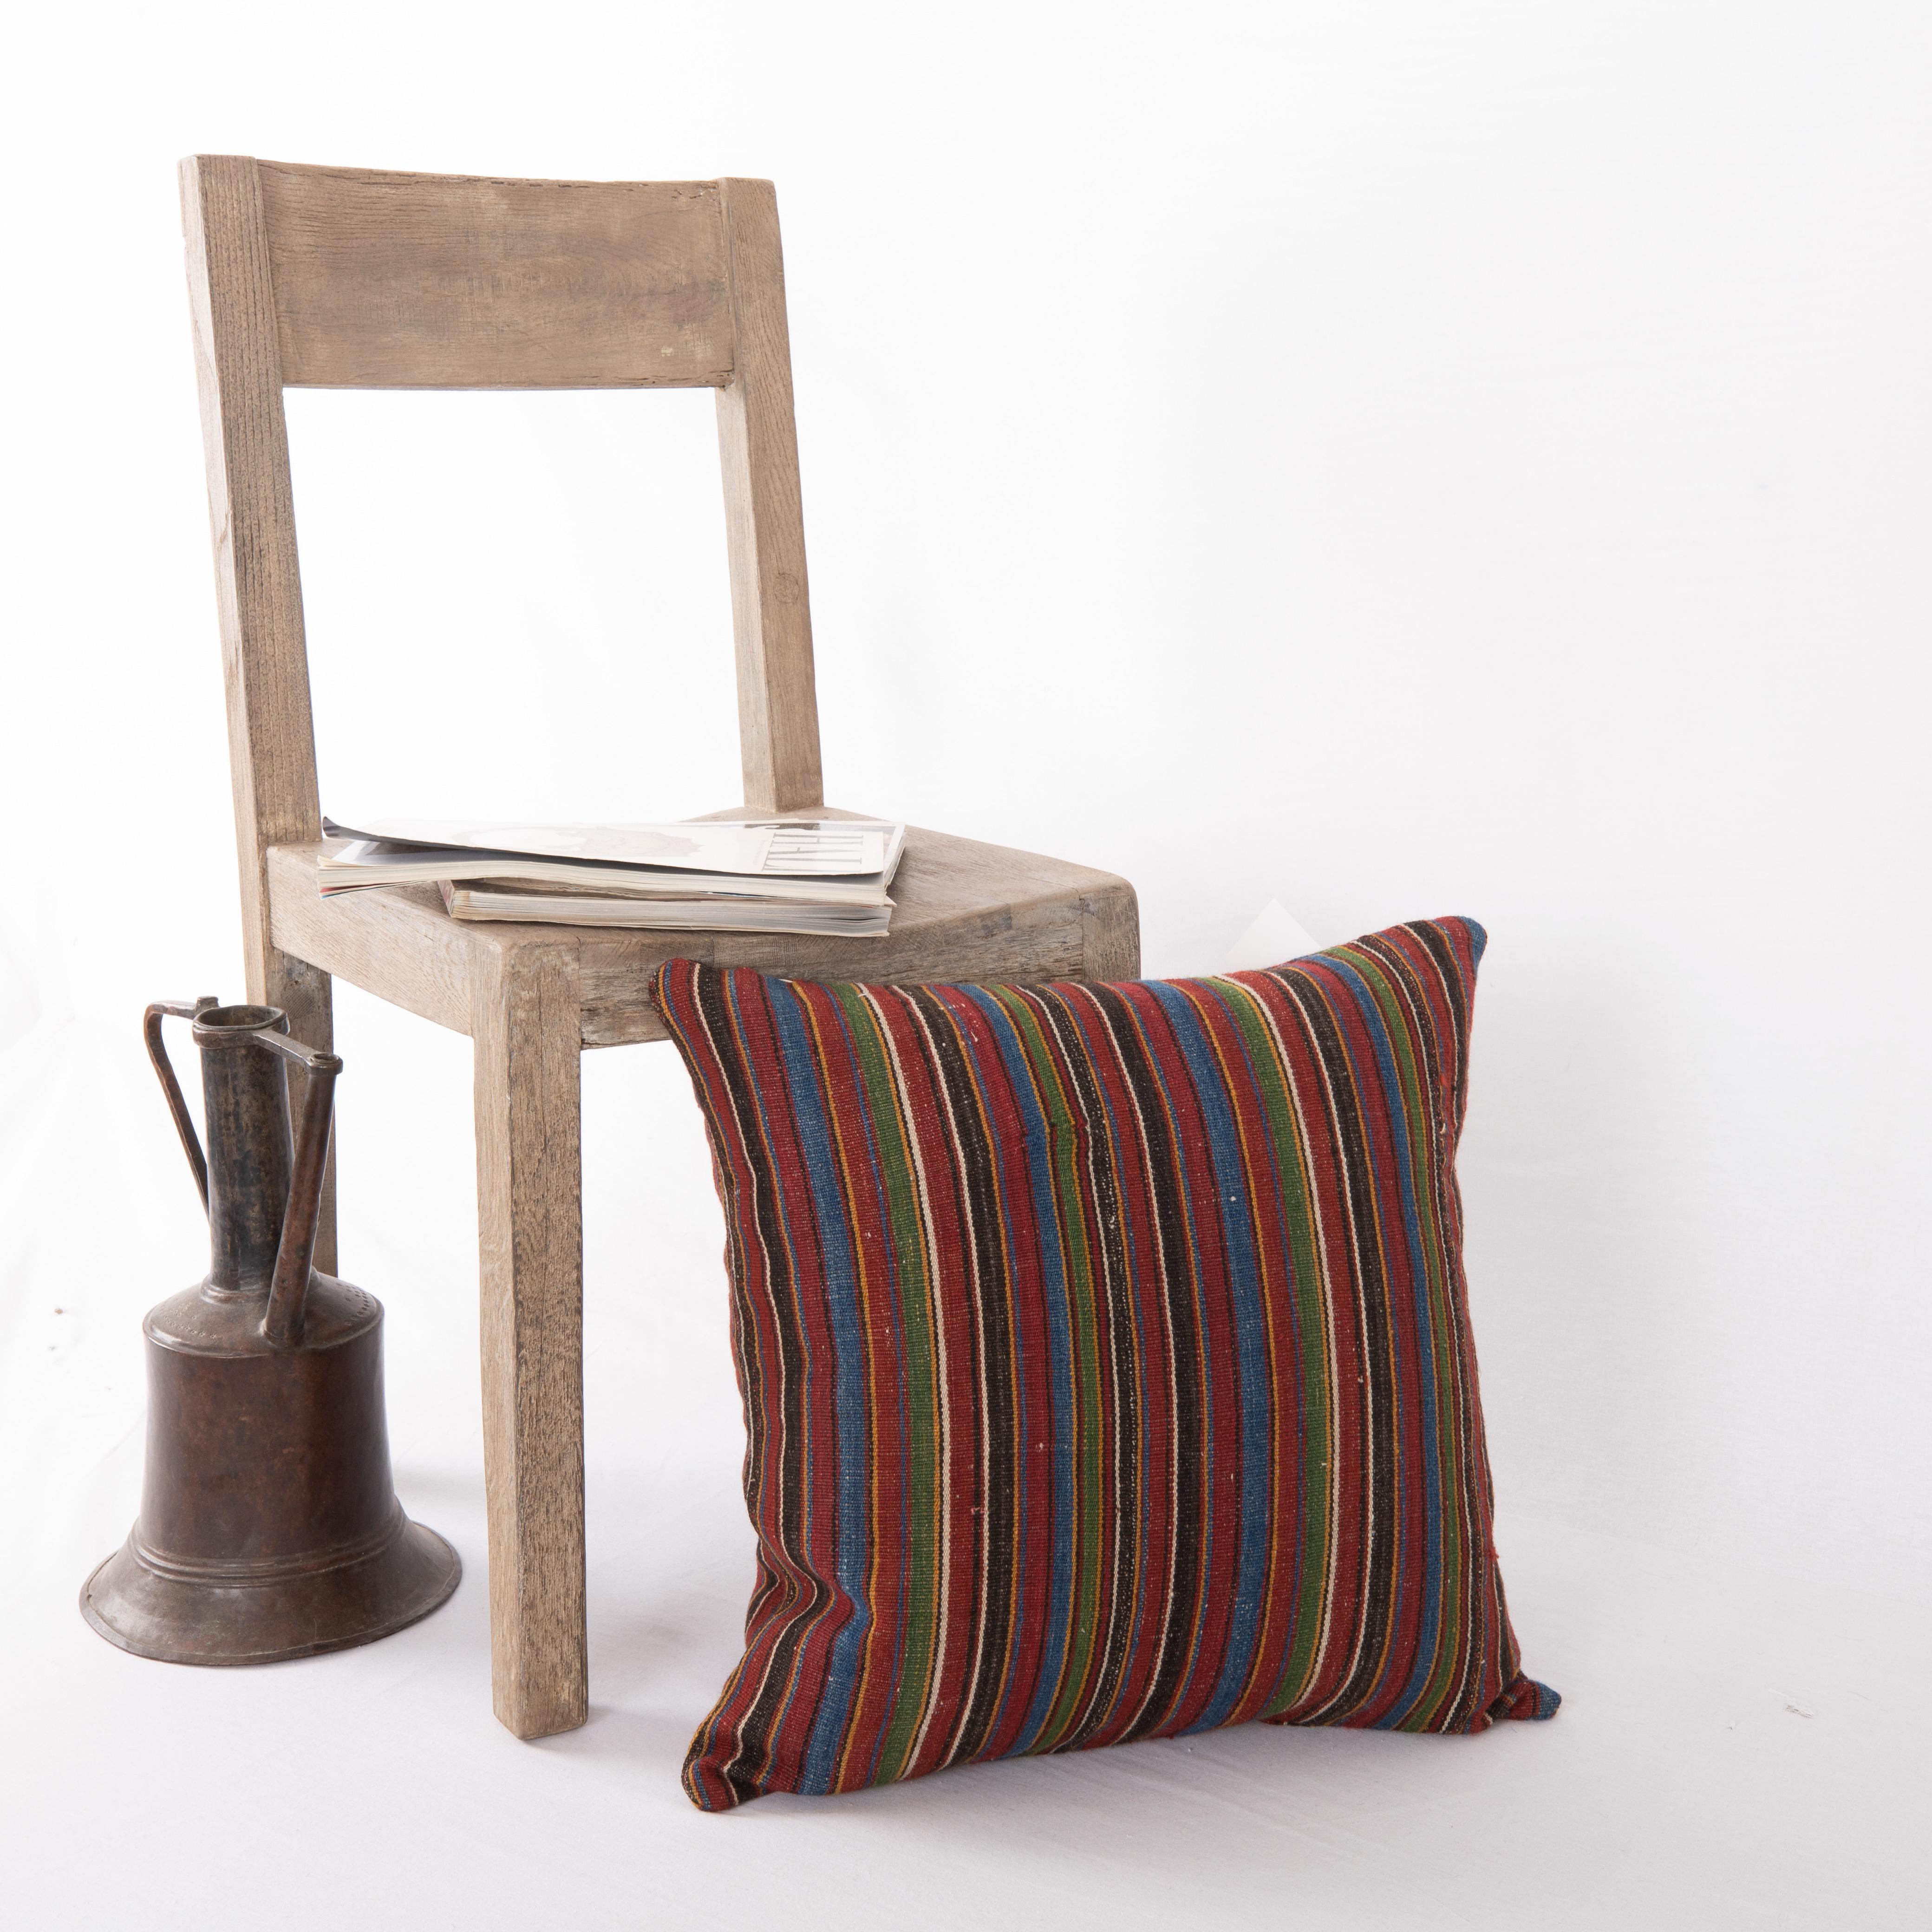 19th Century Double Sided Kilim Pillow Cover Made From an Antique Kilim For Sale